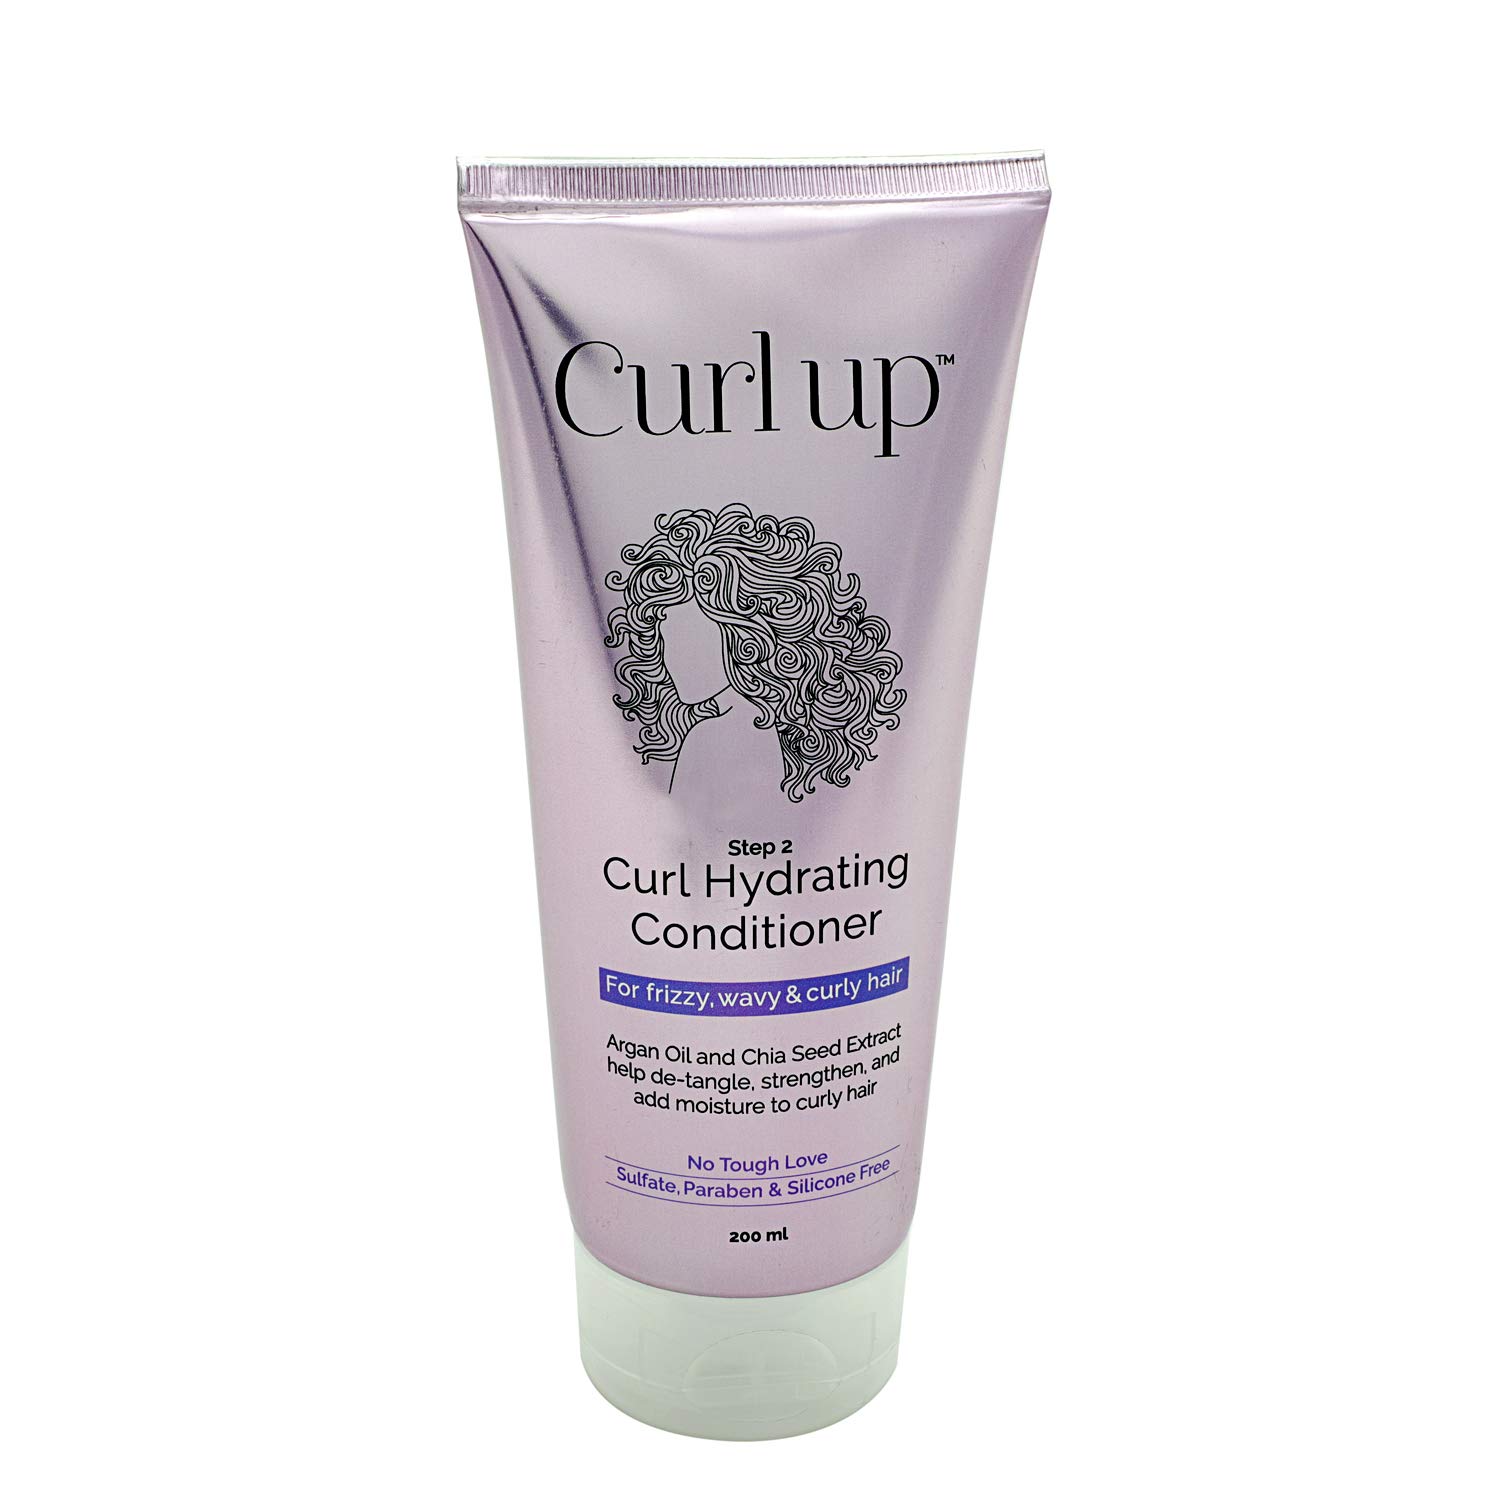 Curl up hydrating conditioner